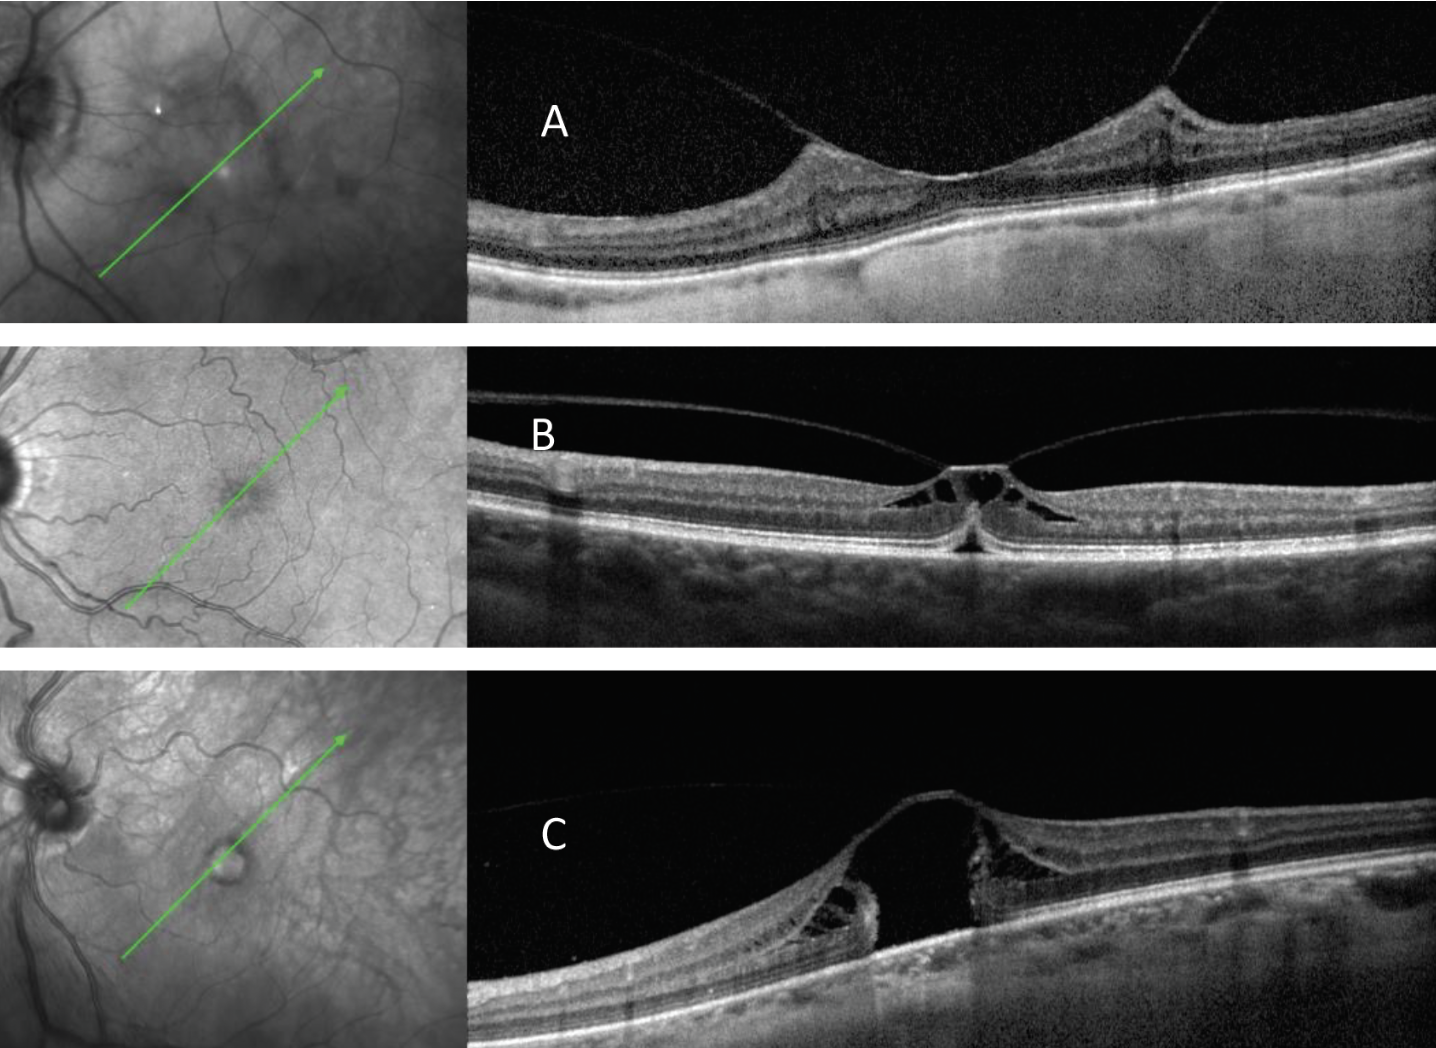 Fig. 16. Broad VMT with epiretinal membrane (A) vs. focal VMT (B and C) with two different macular hole configurations. 